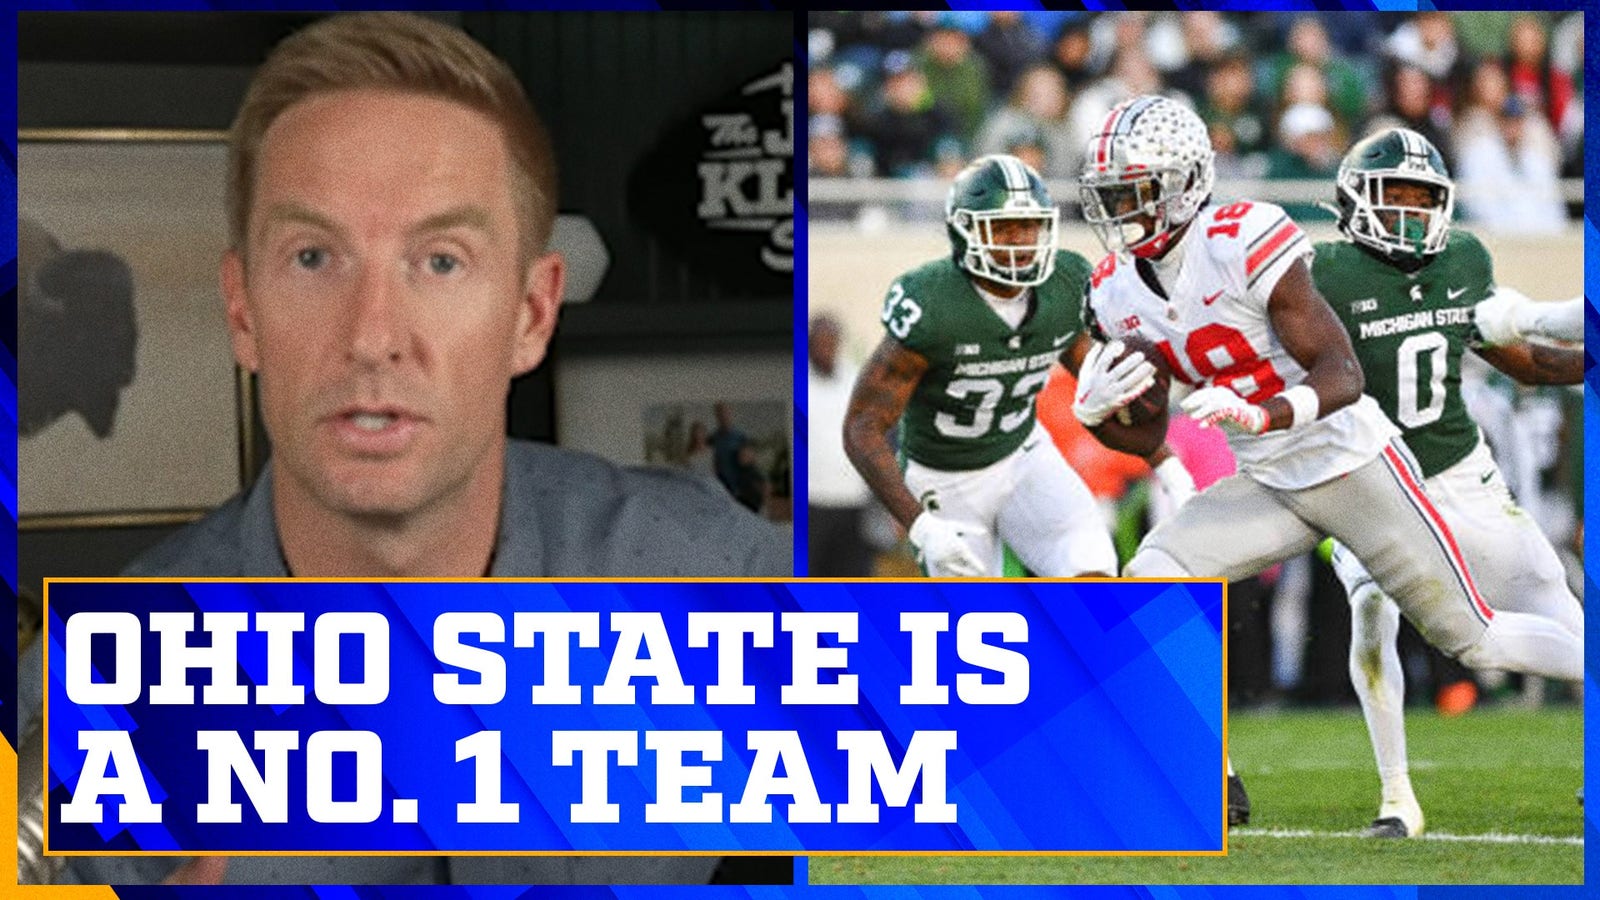 Why Ohio State should be ranked No. 1